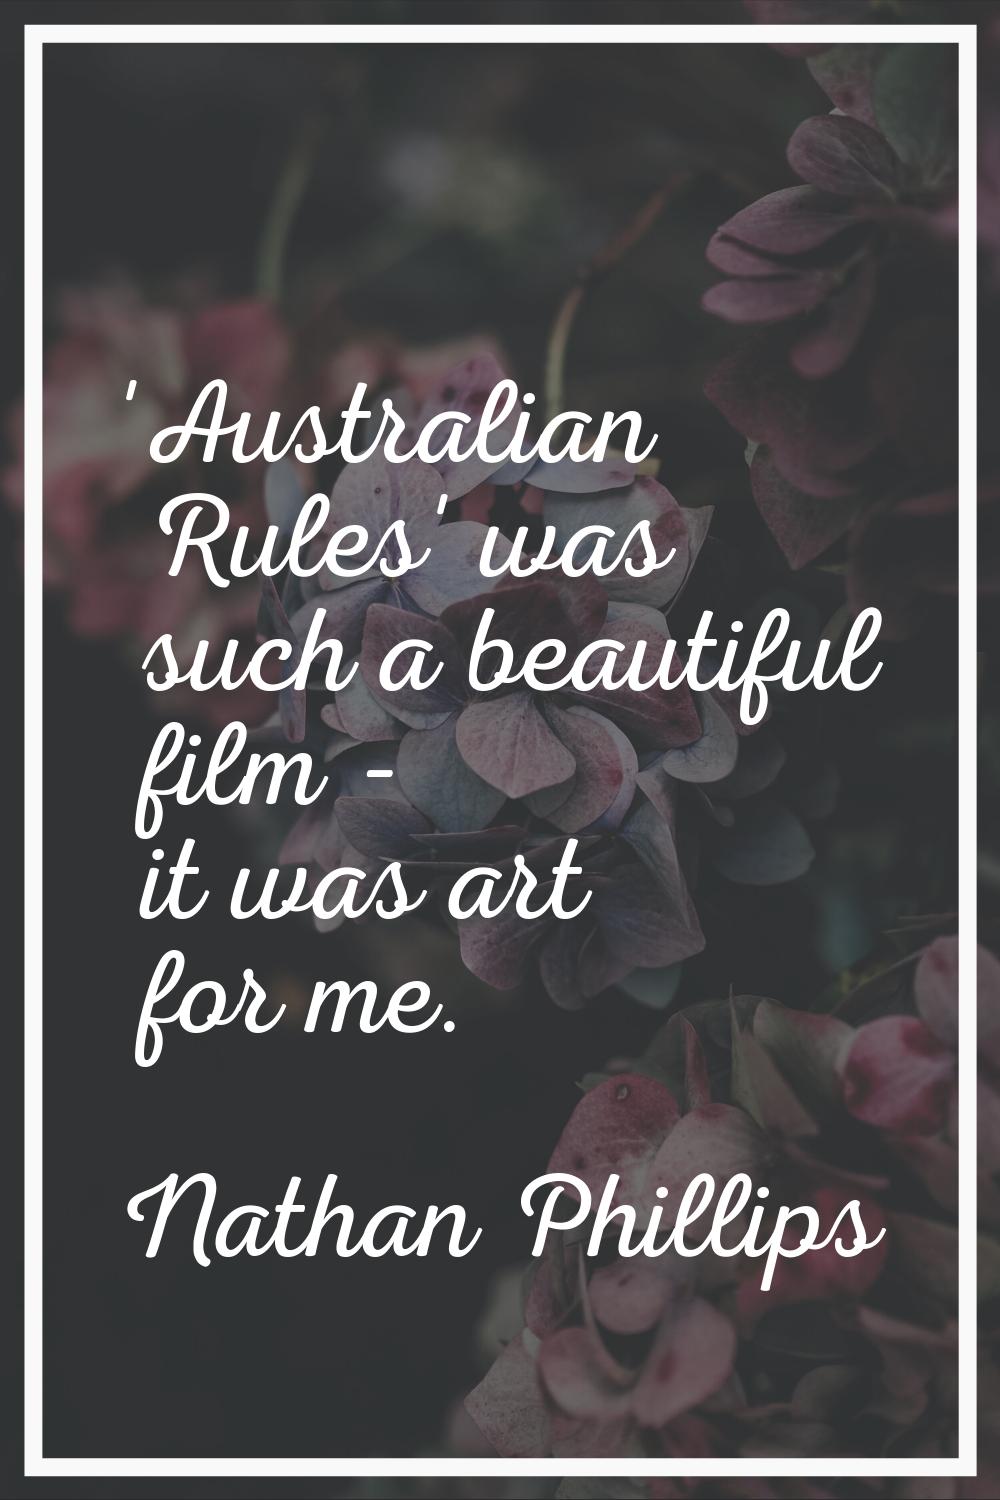 'Australian Rules' was such a beautiful film - it was art for me.